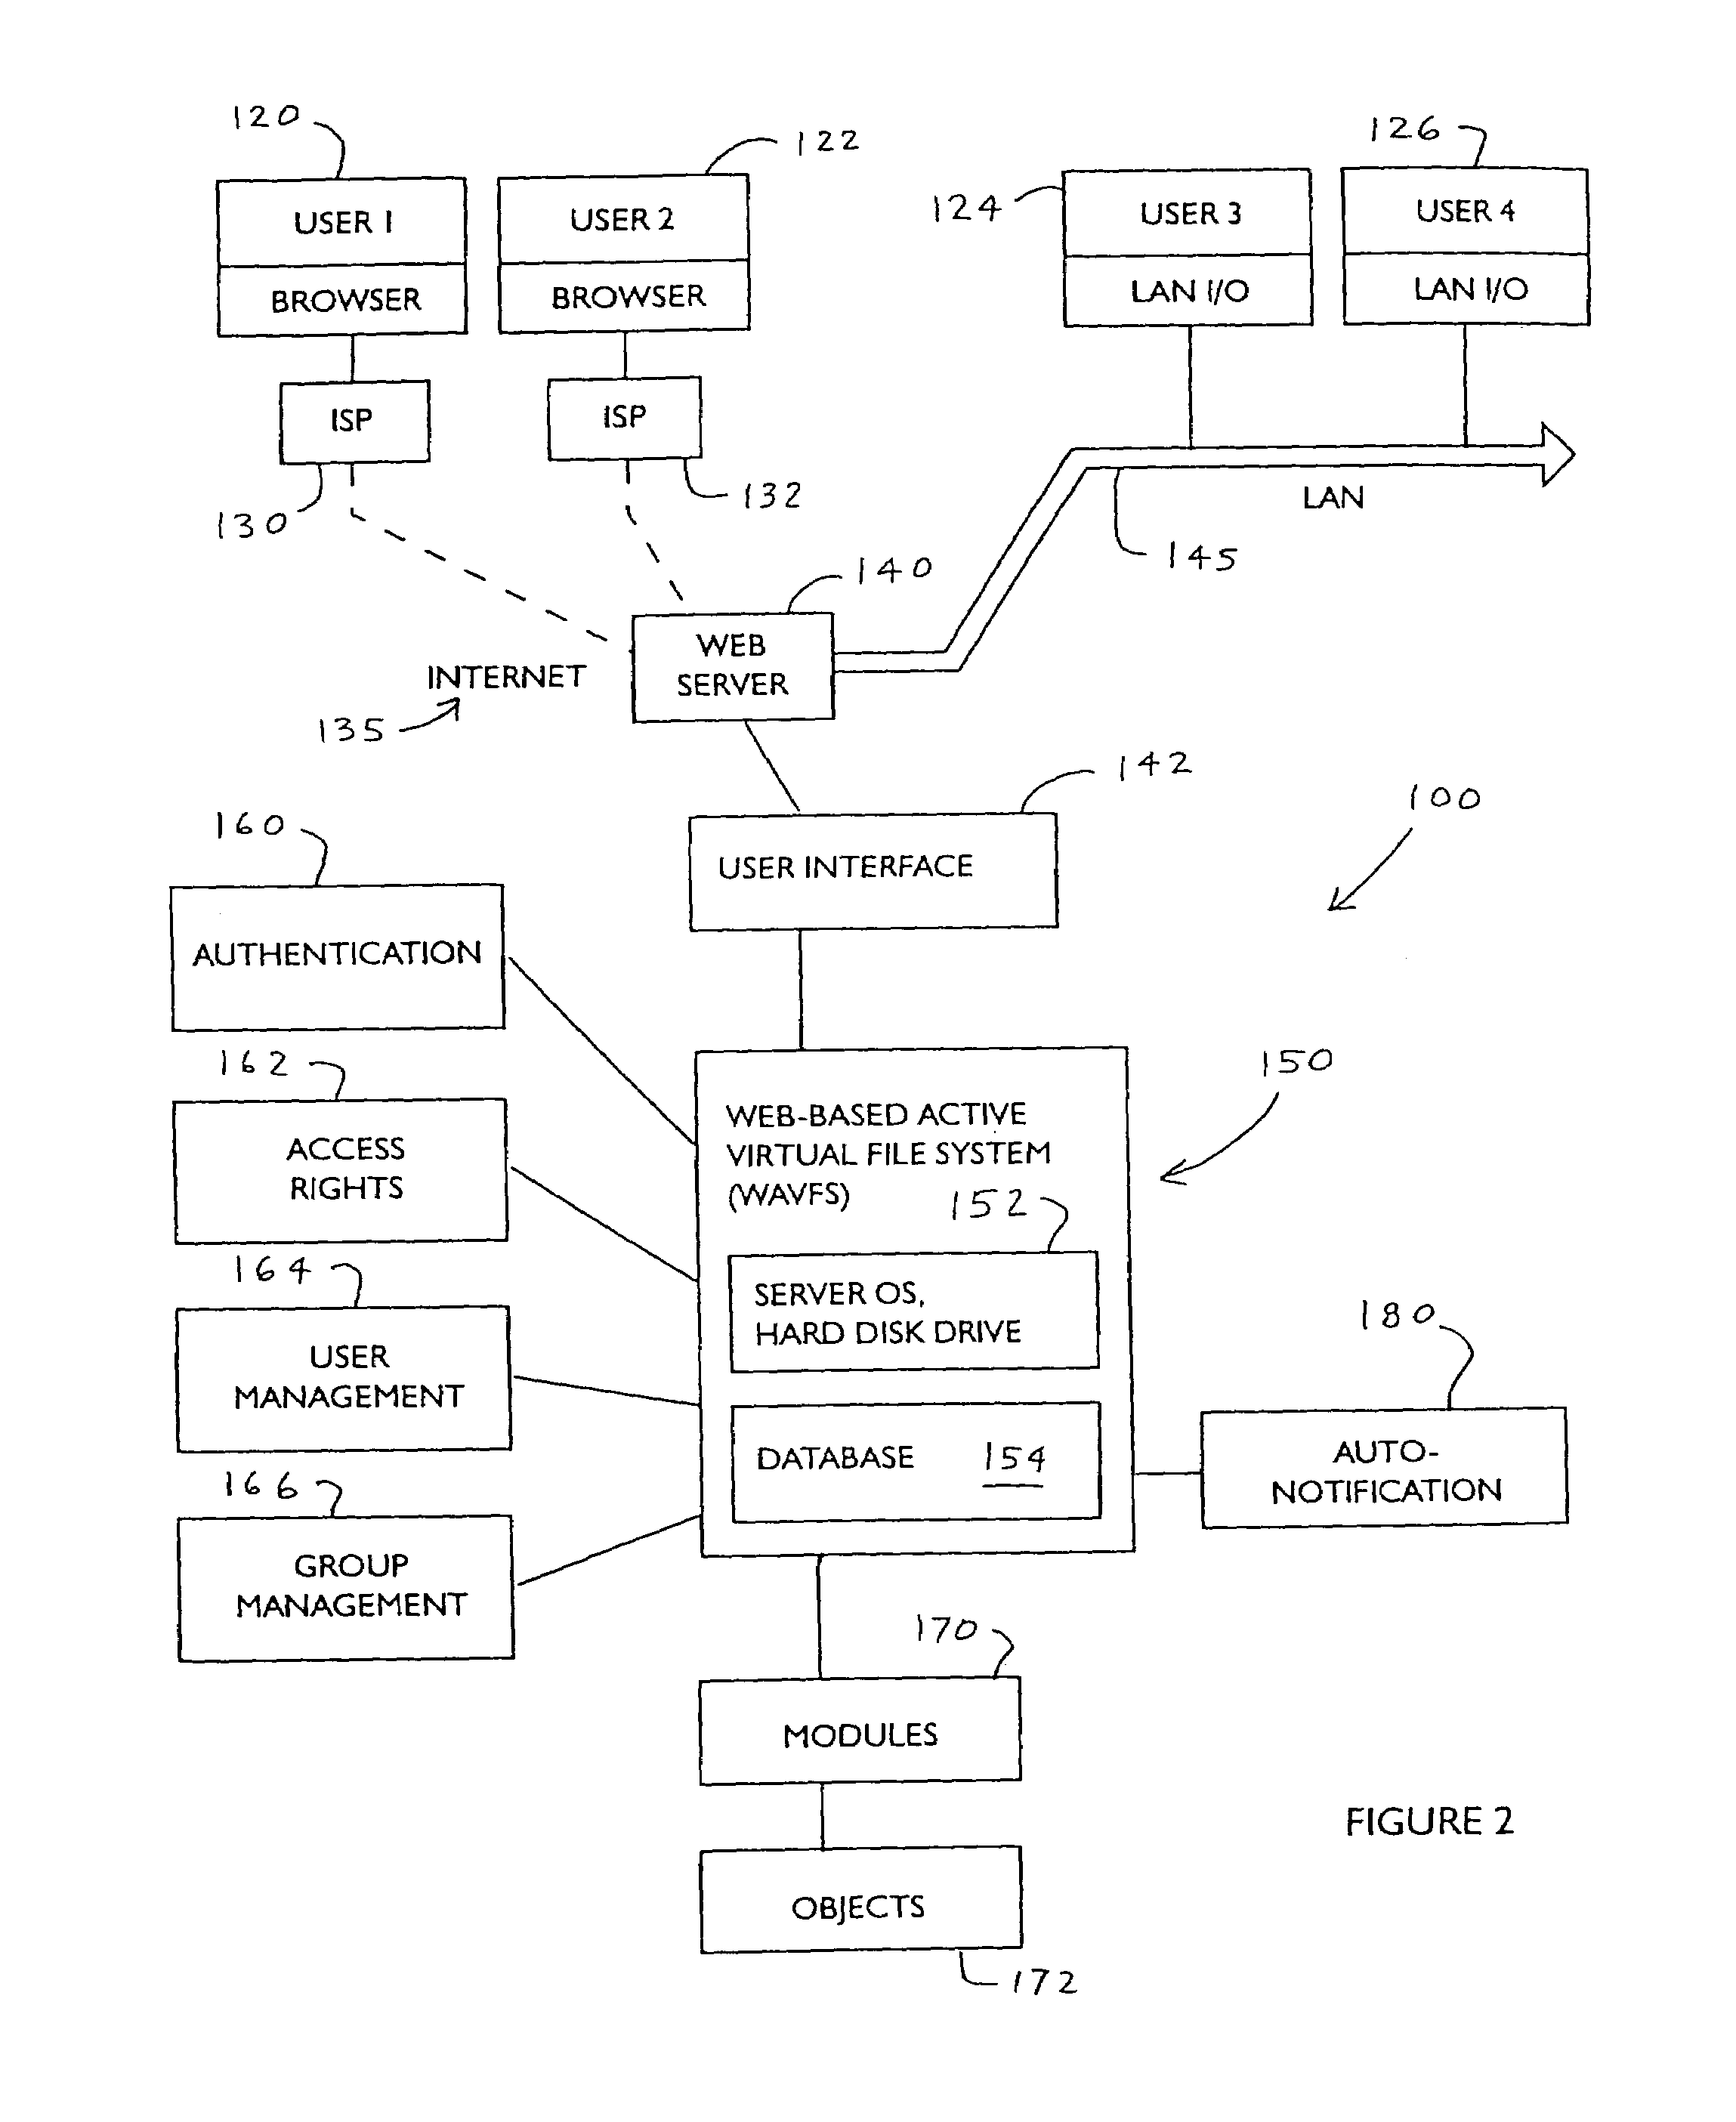 Method and apparatus for providing a web-based active virtual file system